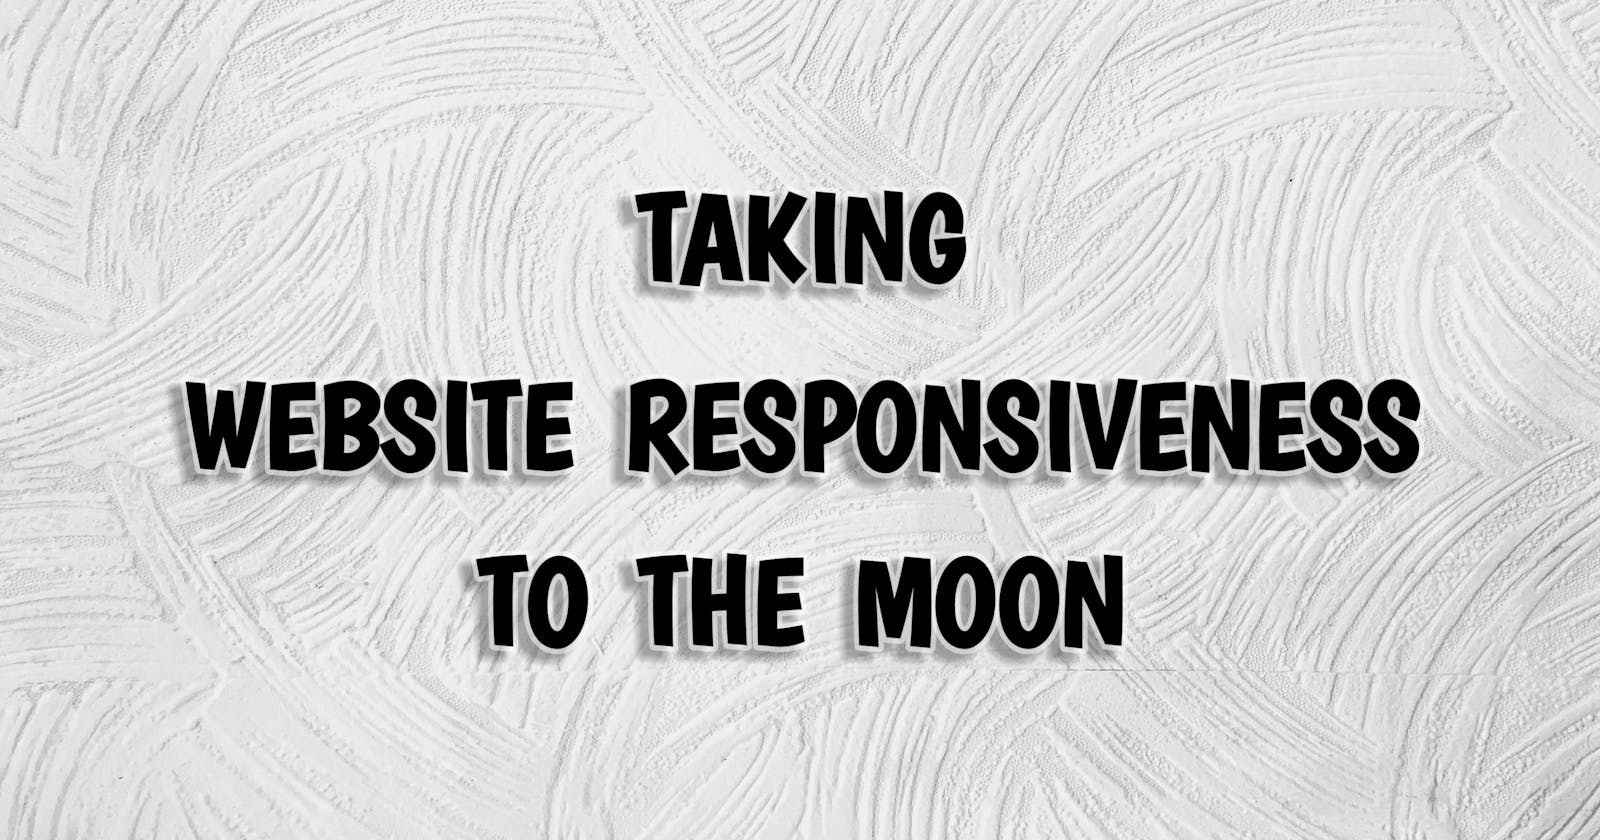 How To Make Websites Responsive For All Devices